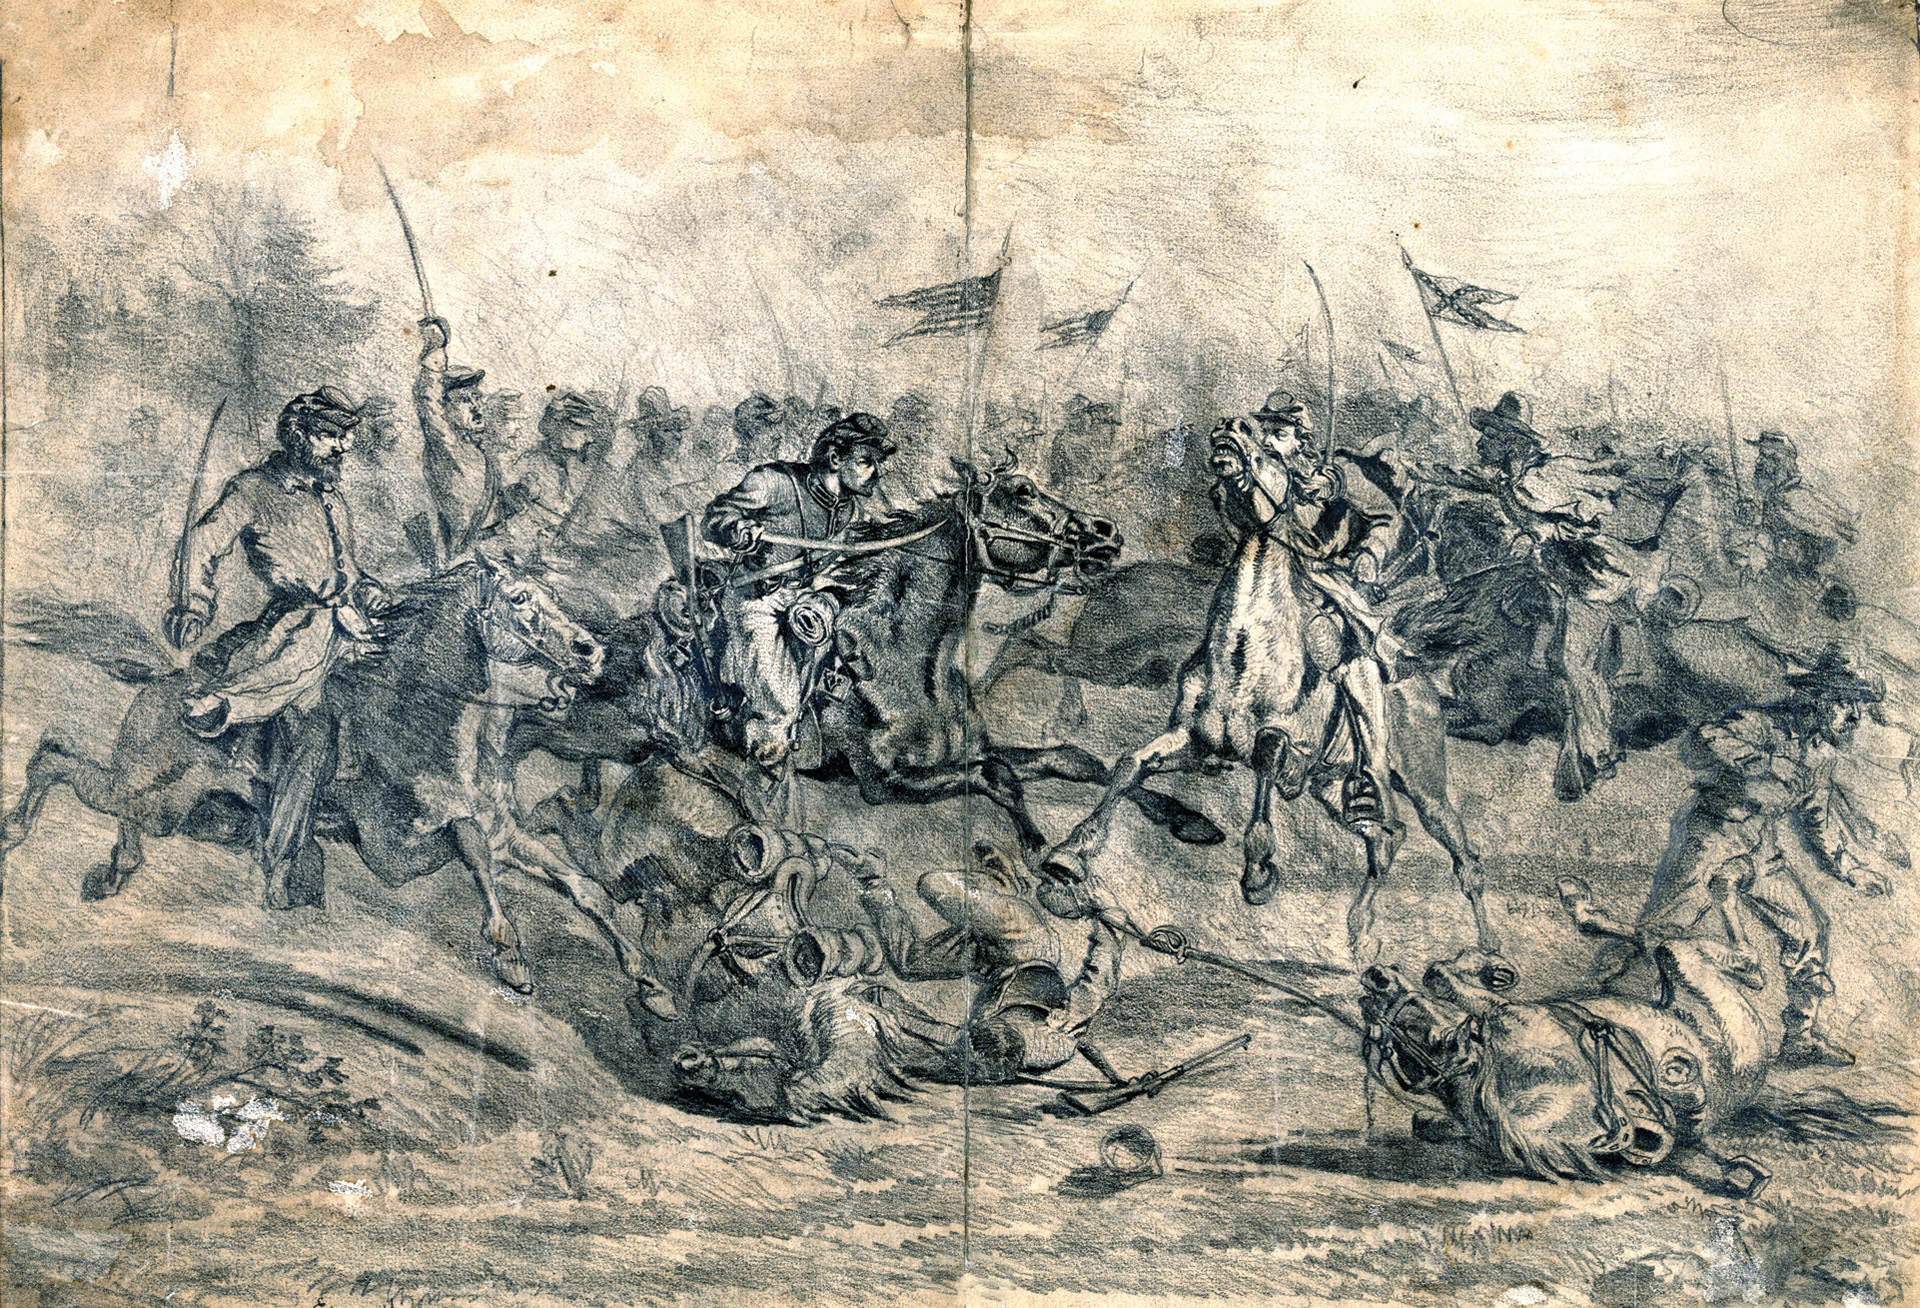 Following a surprise attack by the Federal cavalry at Brandy Station, Hampton launched a savage counterattack that cleared the Federal cavalry from Fleetwood Hill.